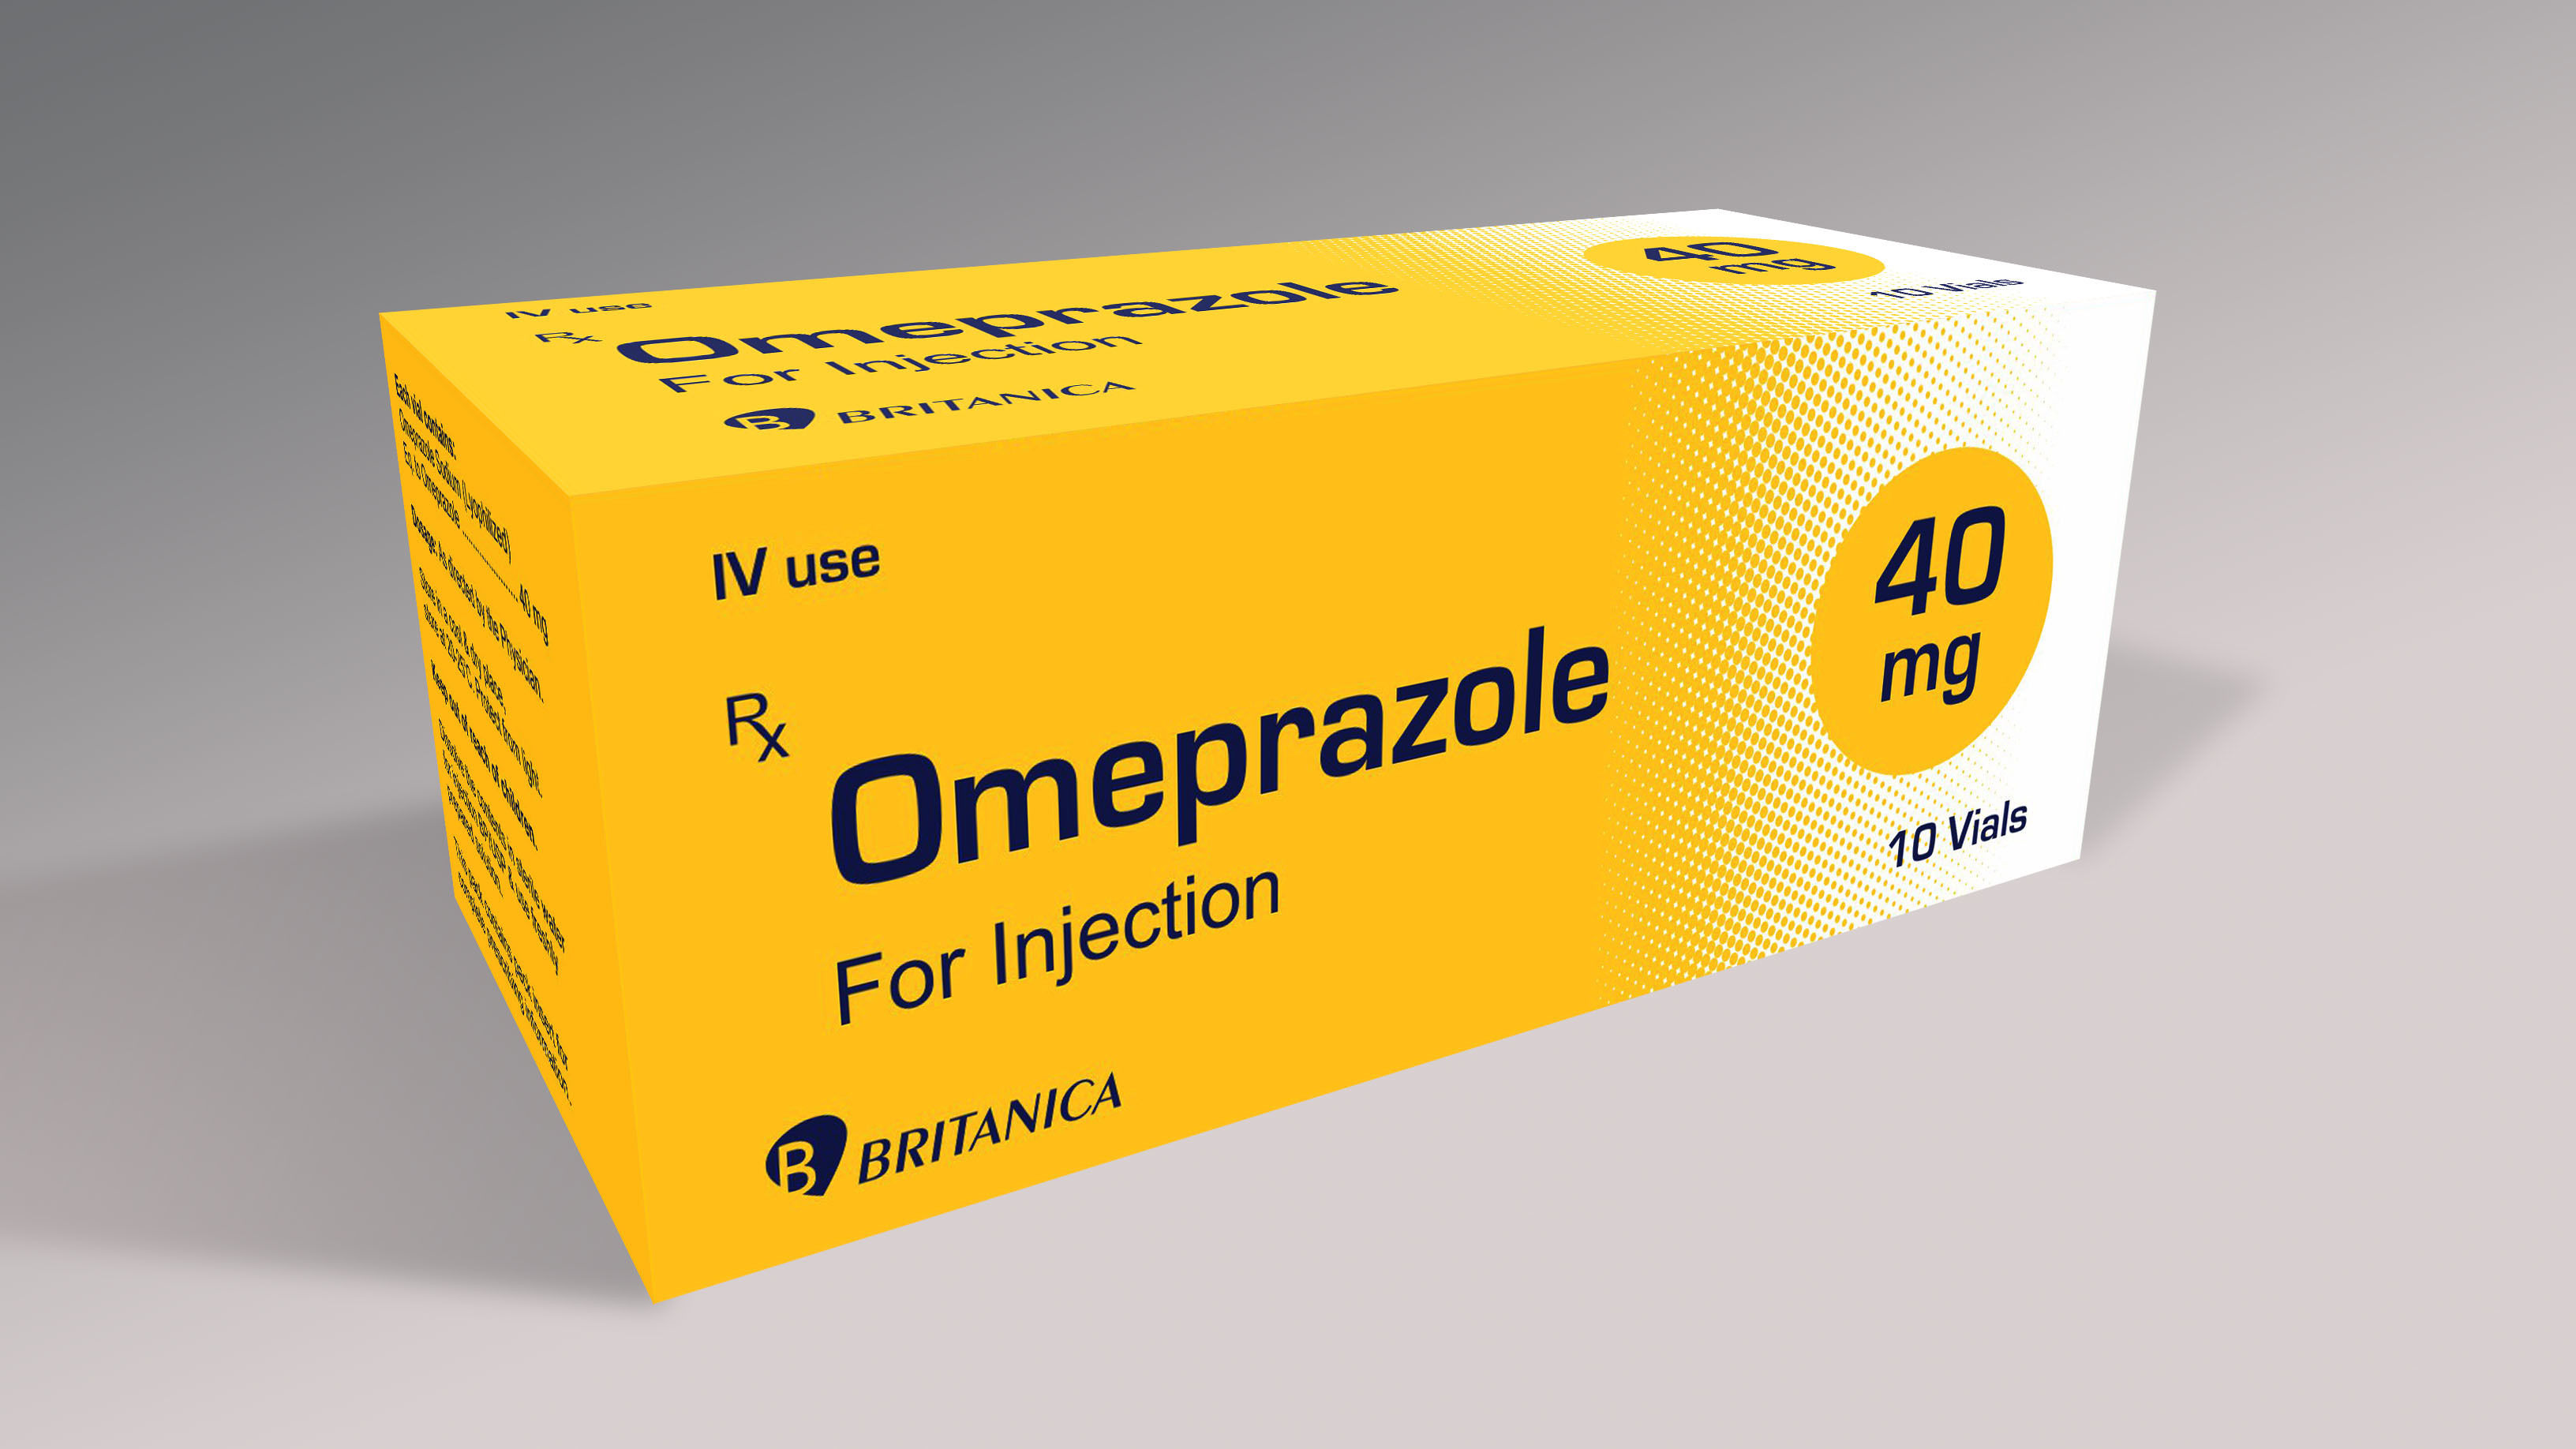 Omeprazole For Injection 40 mg